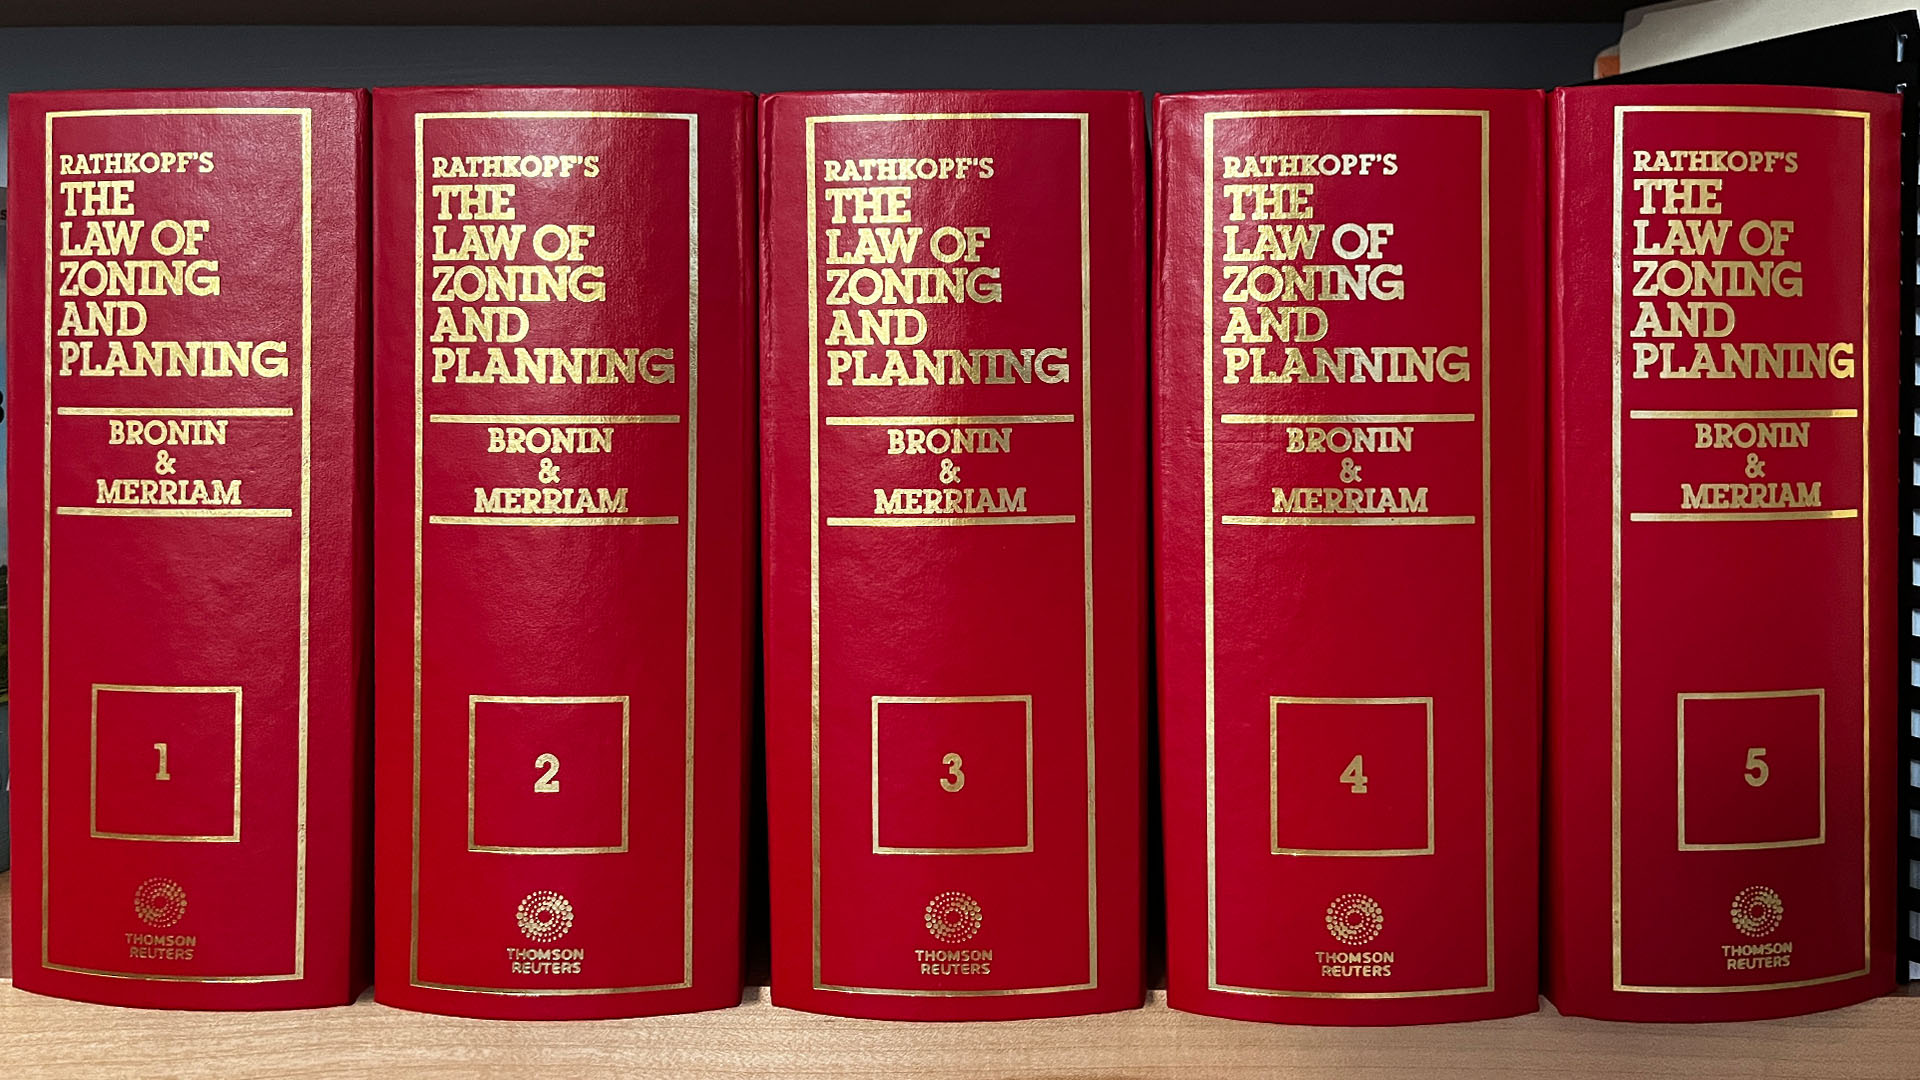 Publication: The law of zoning and planning